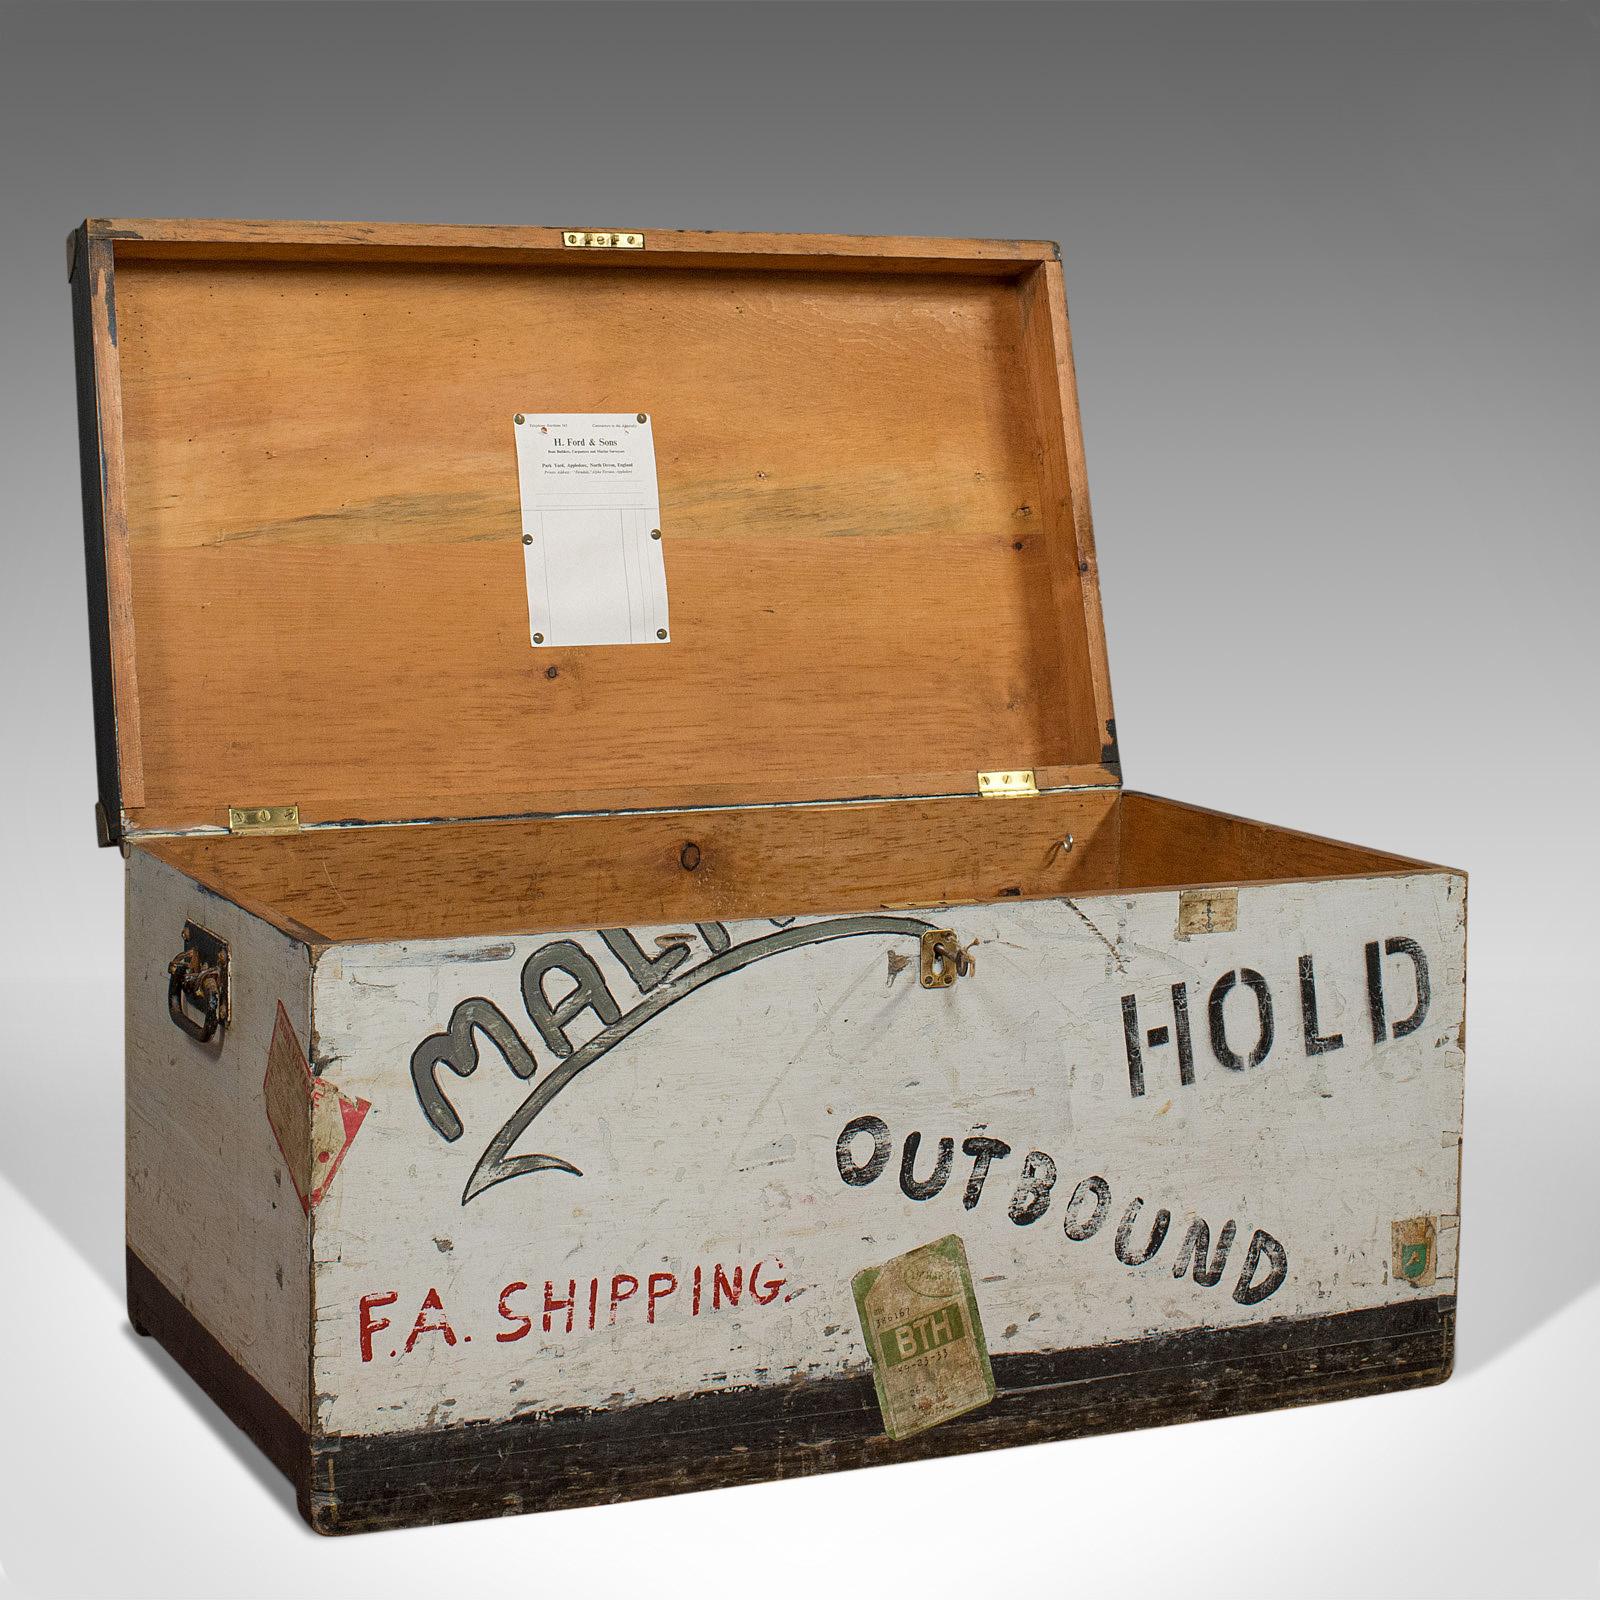 This is an antique Shipwright's chest. An English, pine maritime tool or steamer trunk and dating to the late Victorian period, circa 1900.

Time-served maritime history with later vintage appeal
Displays a desirable aged patina
Select pine in